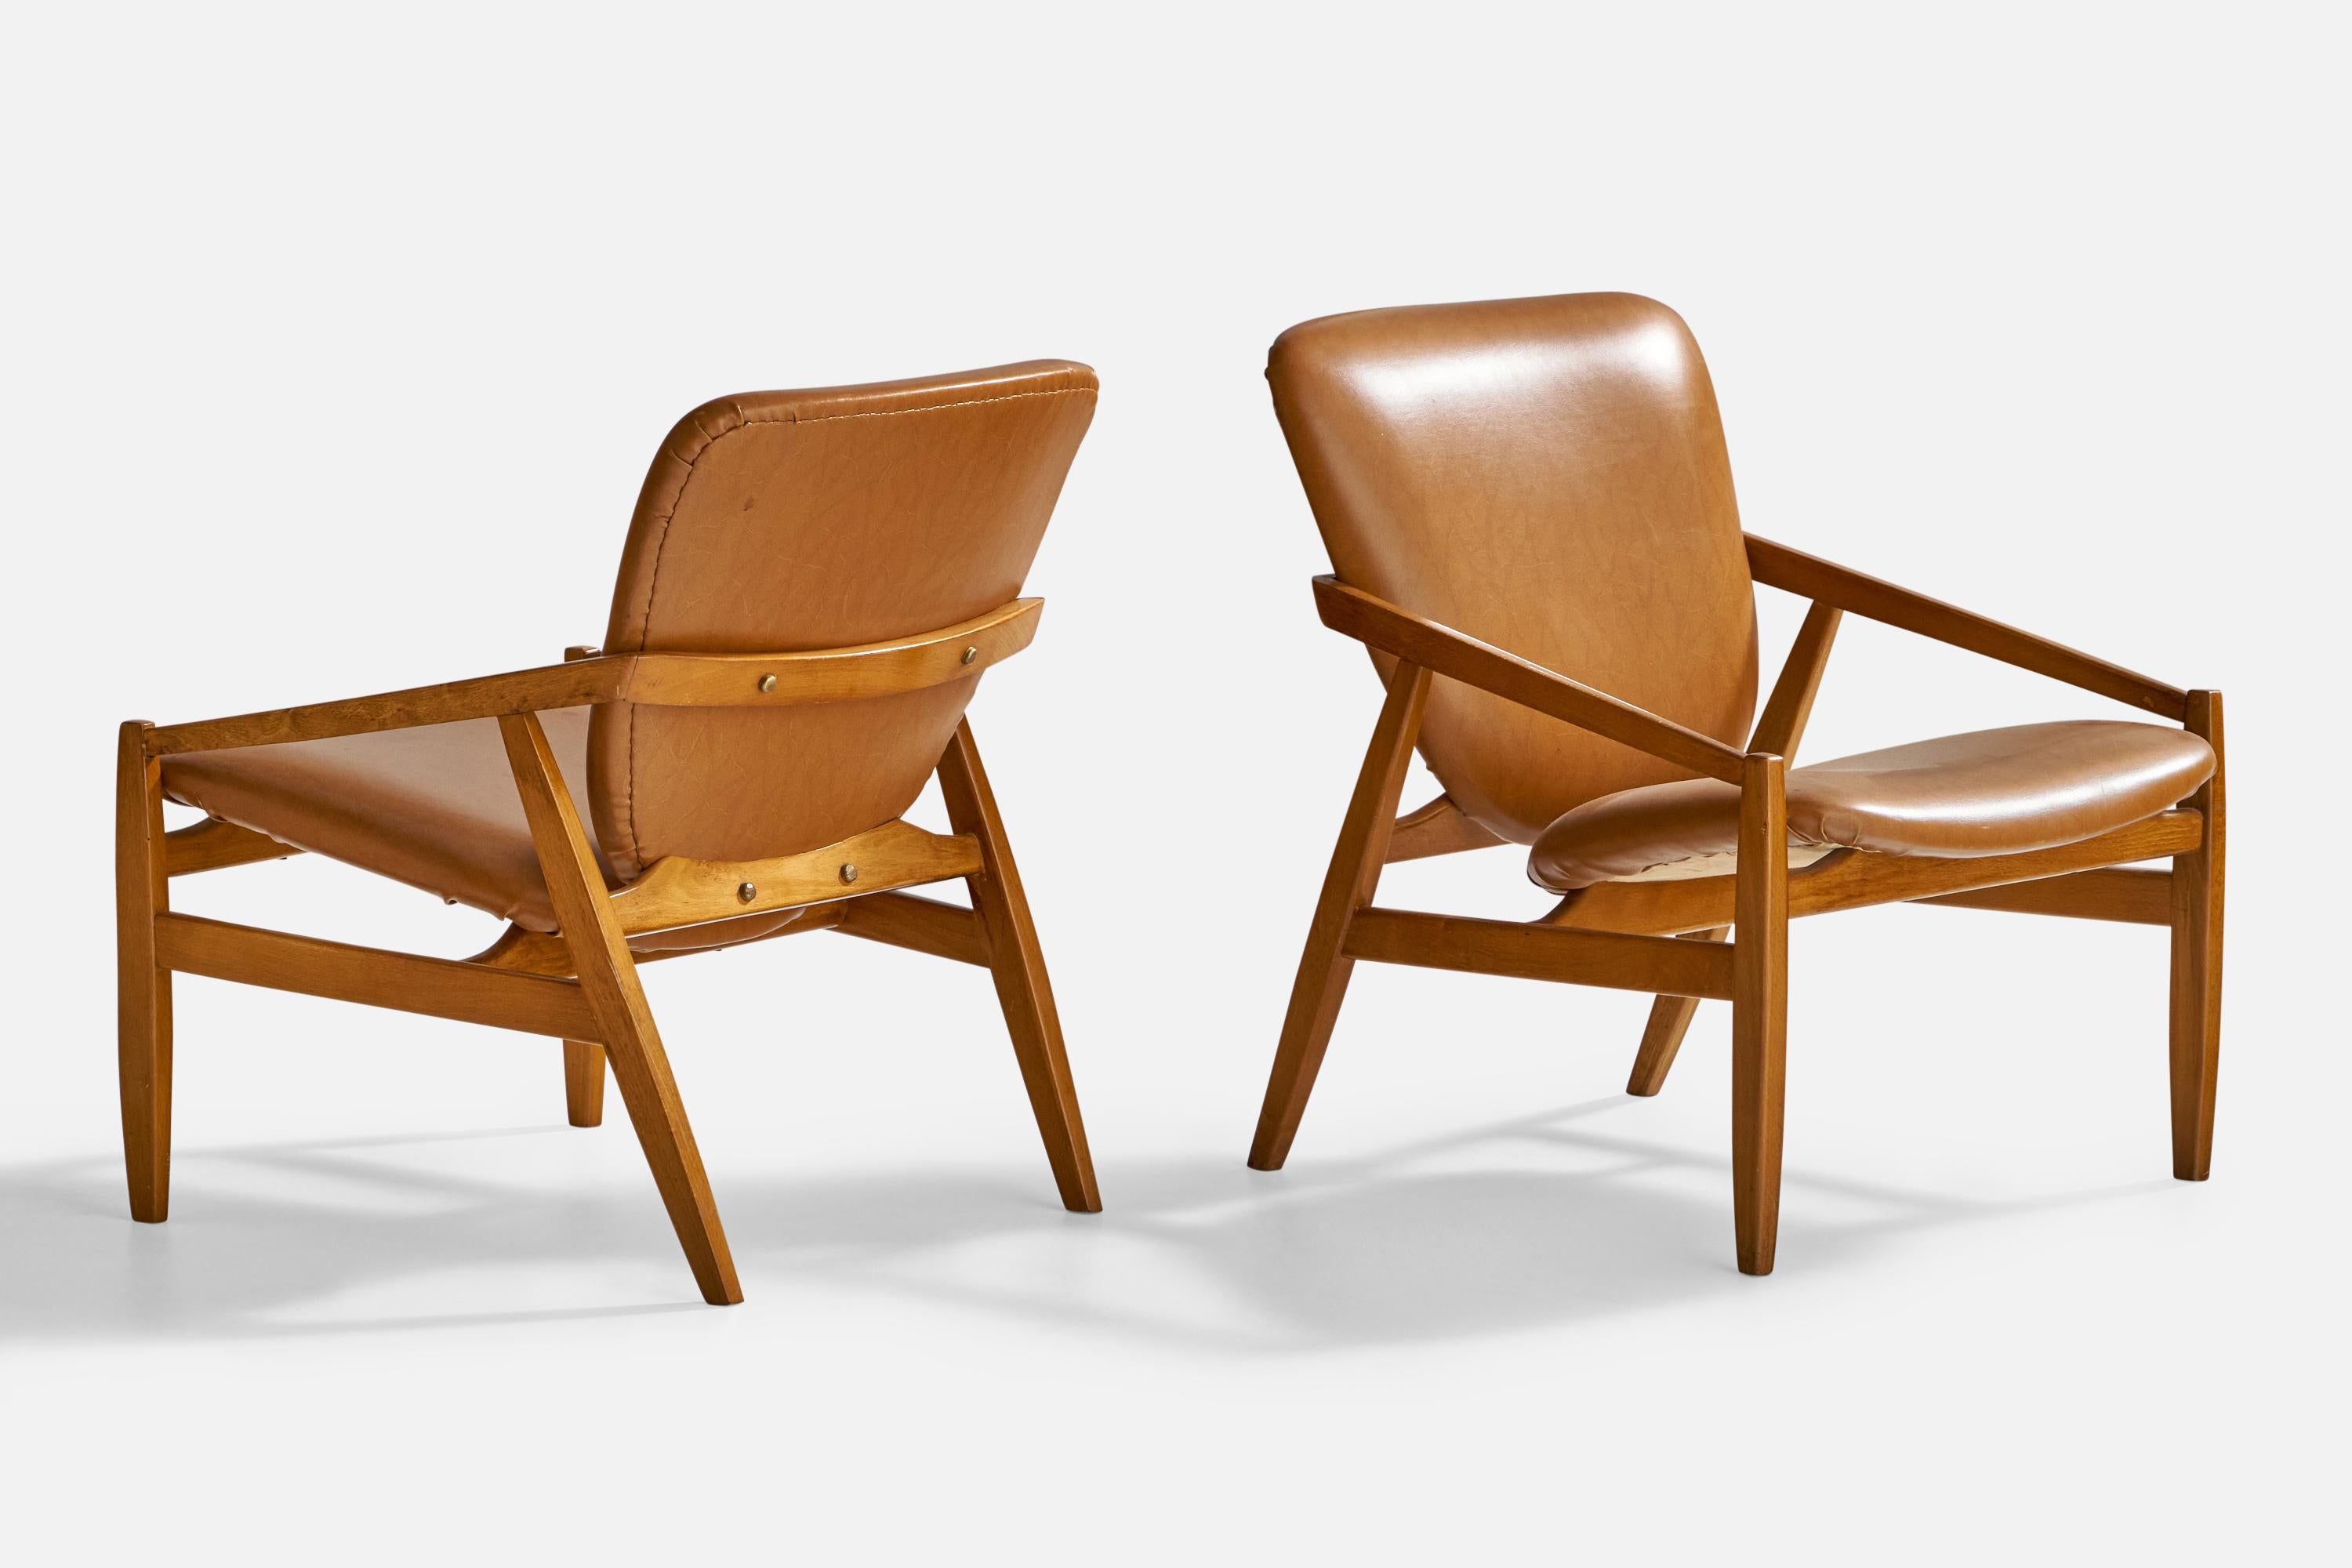 A pair of walnut and brown leatherette lounge chairs designed and produced in Italy, 1950s.

Seat height: 14.5”